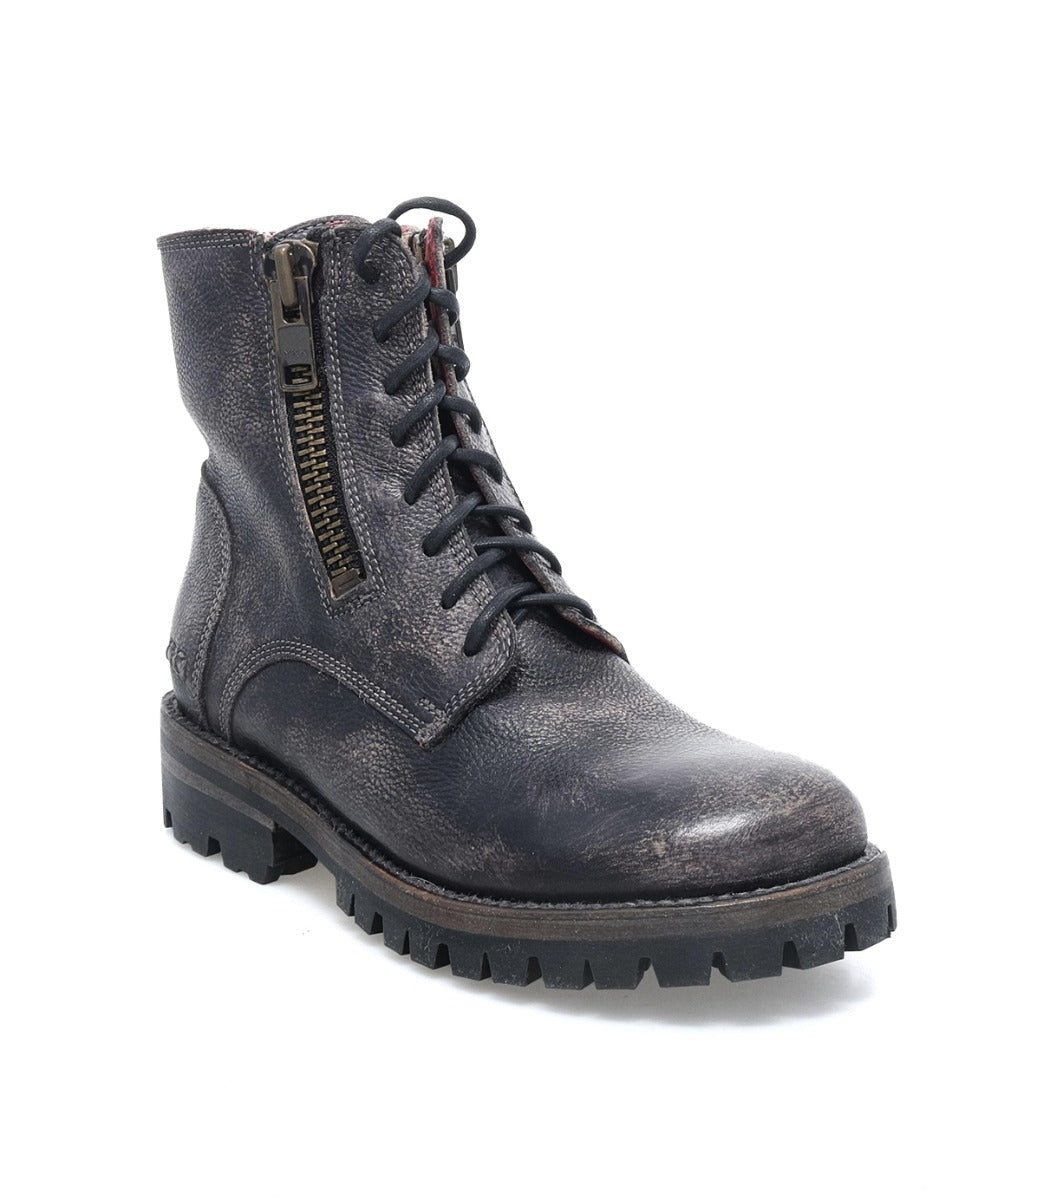 A men's black leather Tactic Trek boot with a zipper on the side by Bed Stu.